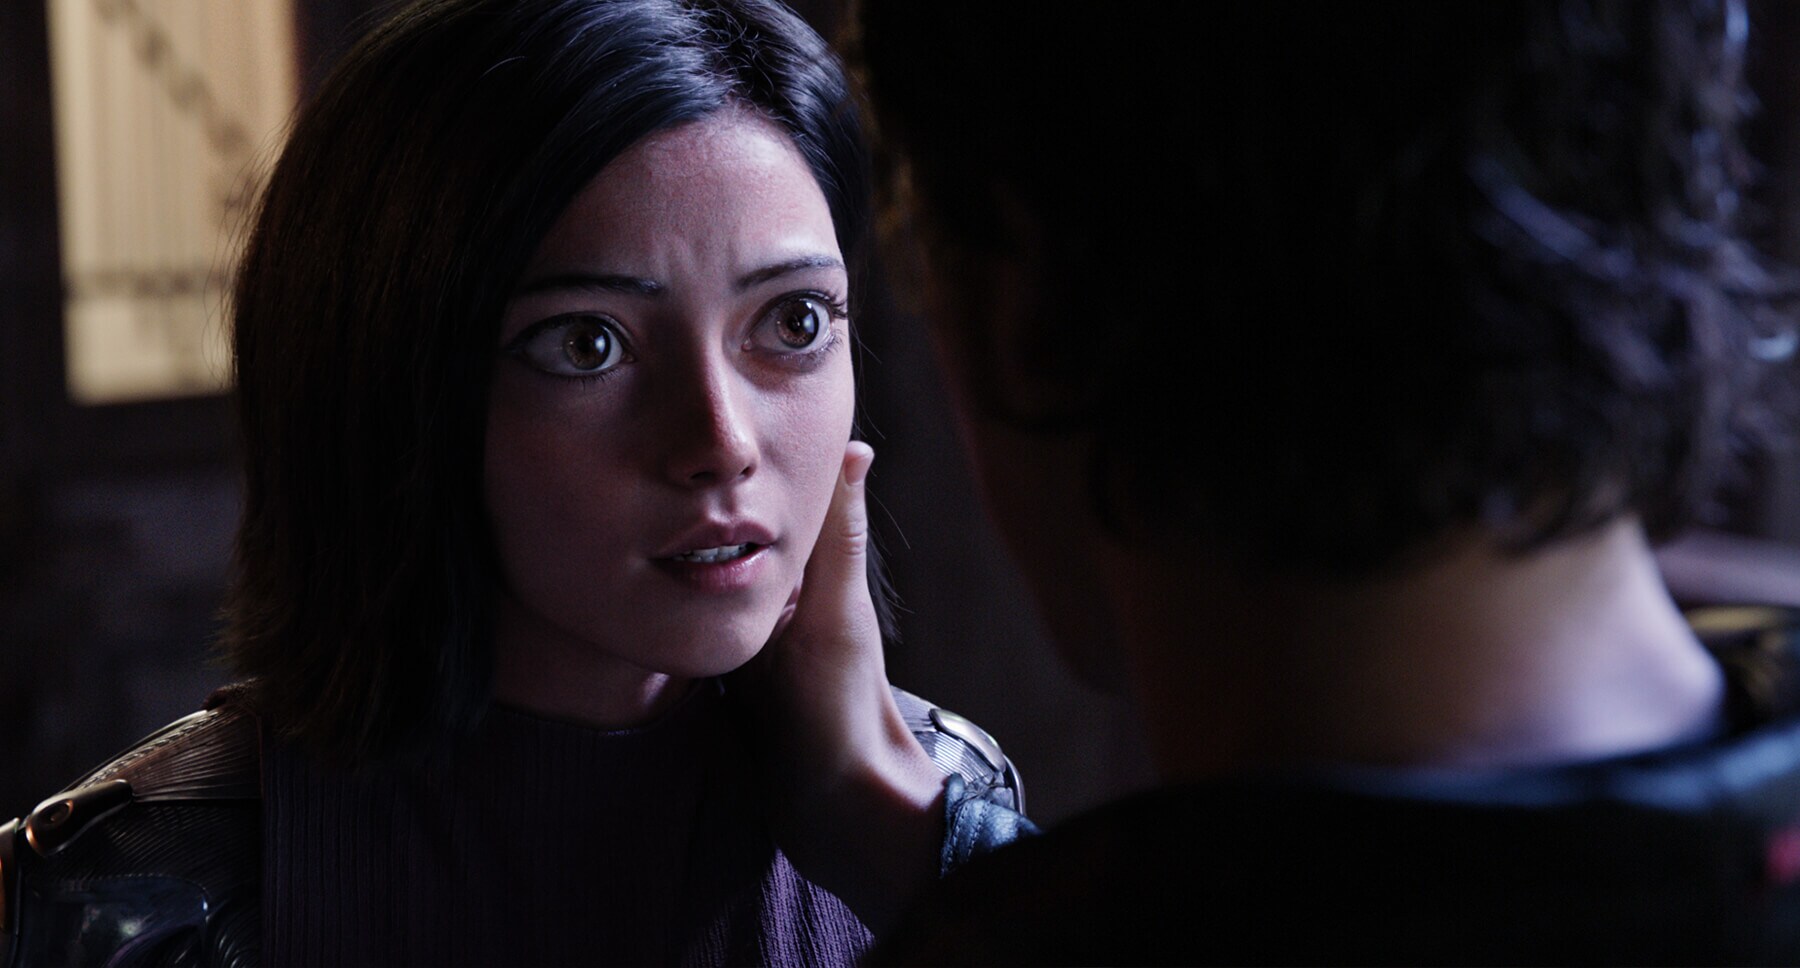 Rosa Salazar talking to a character in the movie "Alita: Battle Angel"